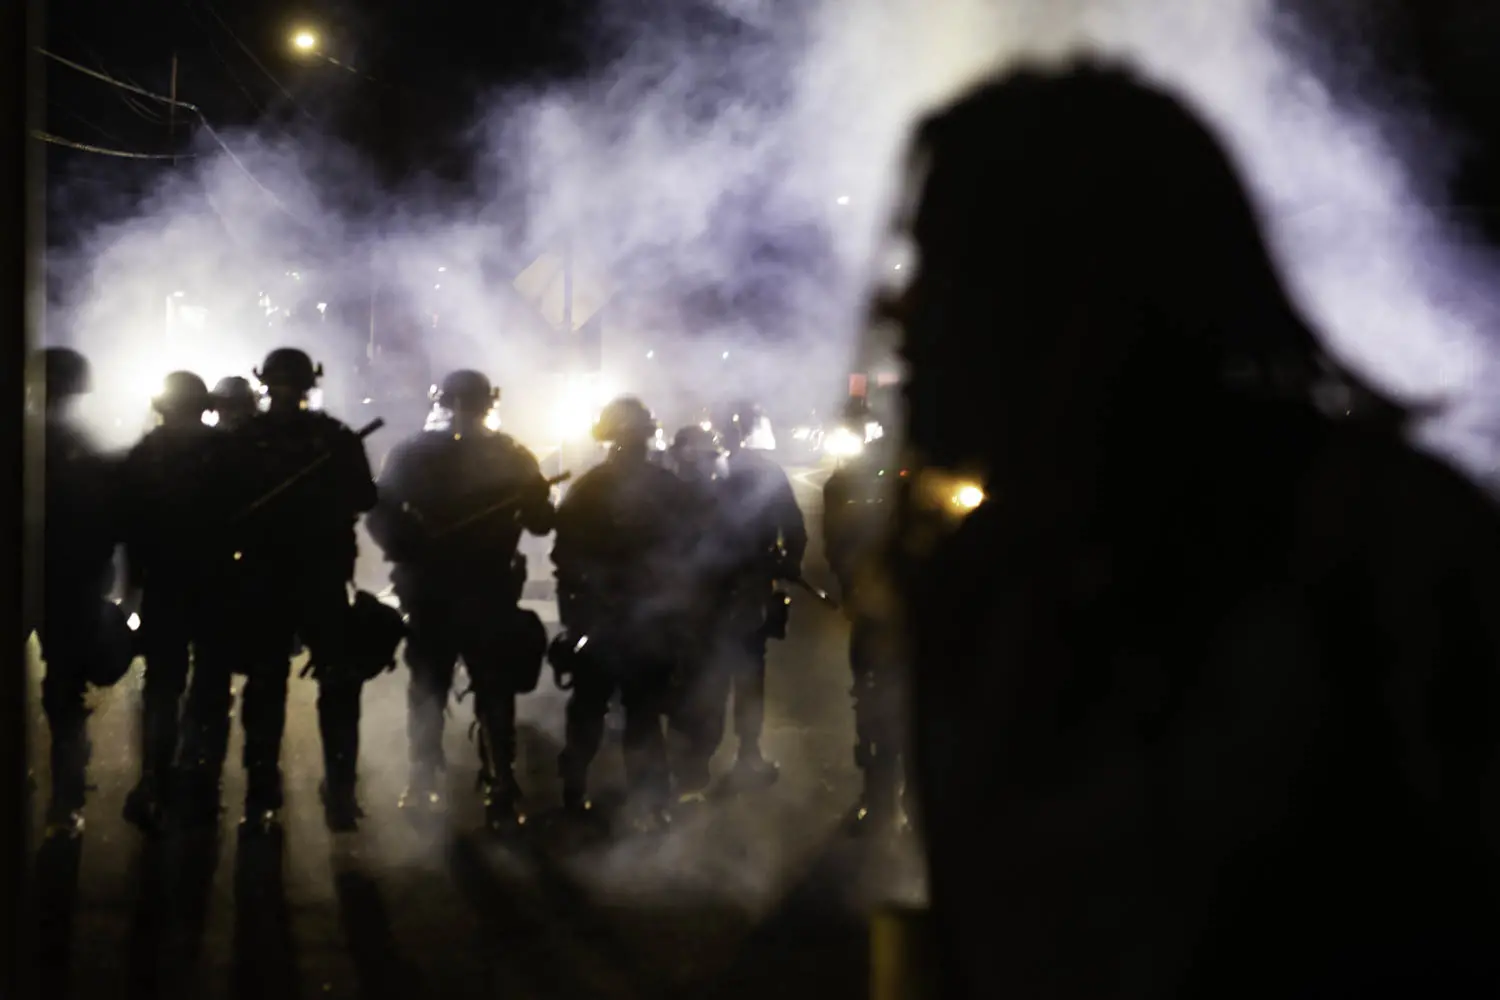 A protester crosses the street as a line of Portland police officers approach amidst a cloud of teargas on the night of August 9, 2020.